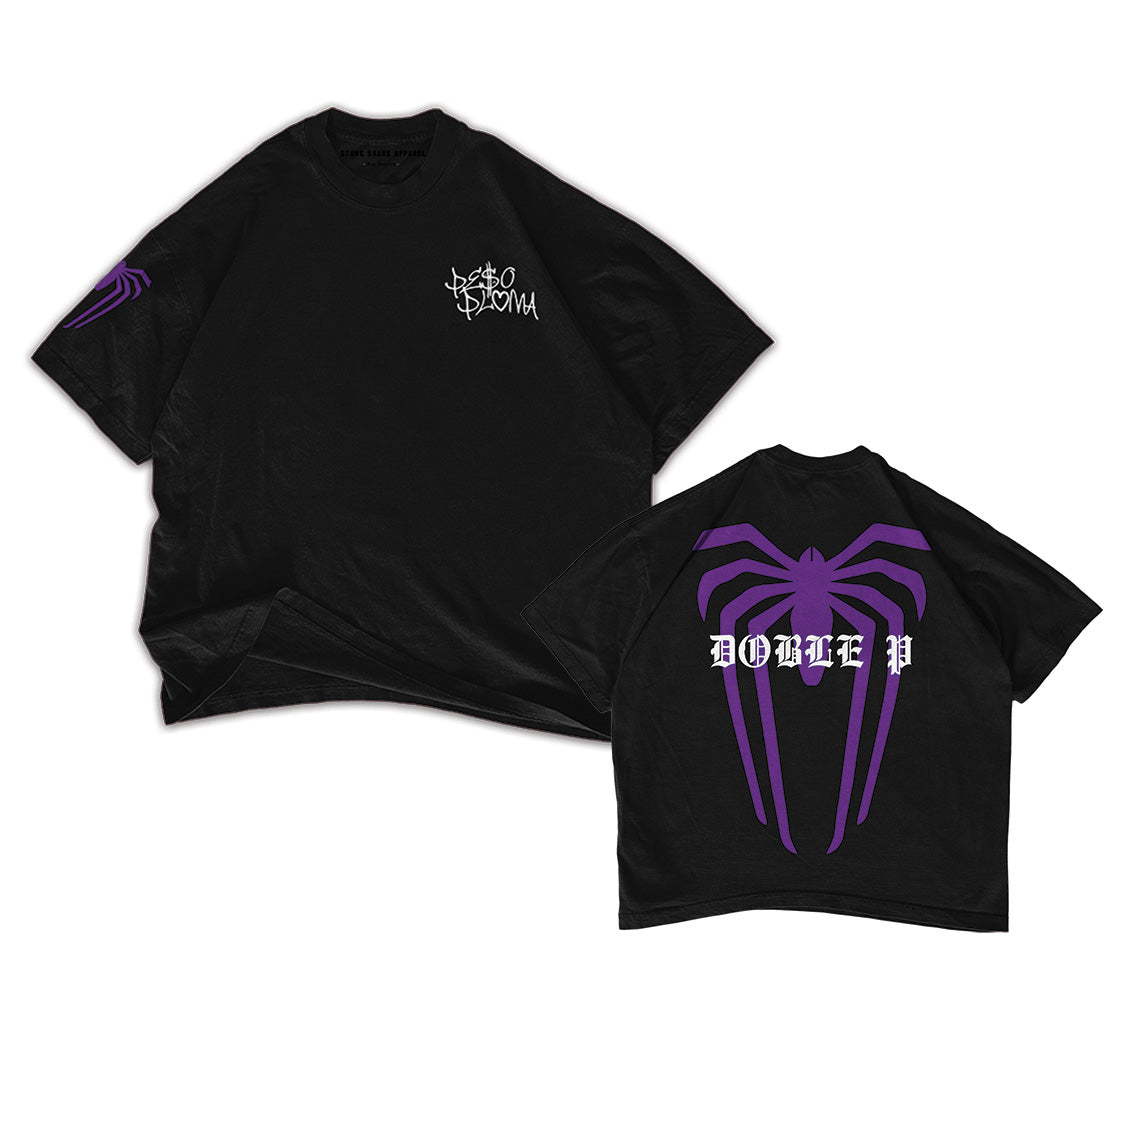 SPIDER JERSEY & TEES